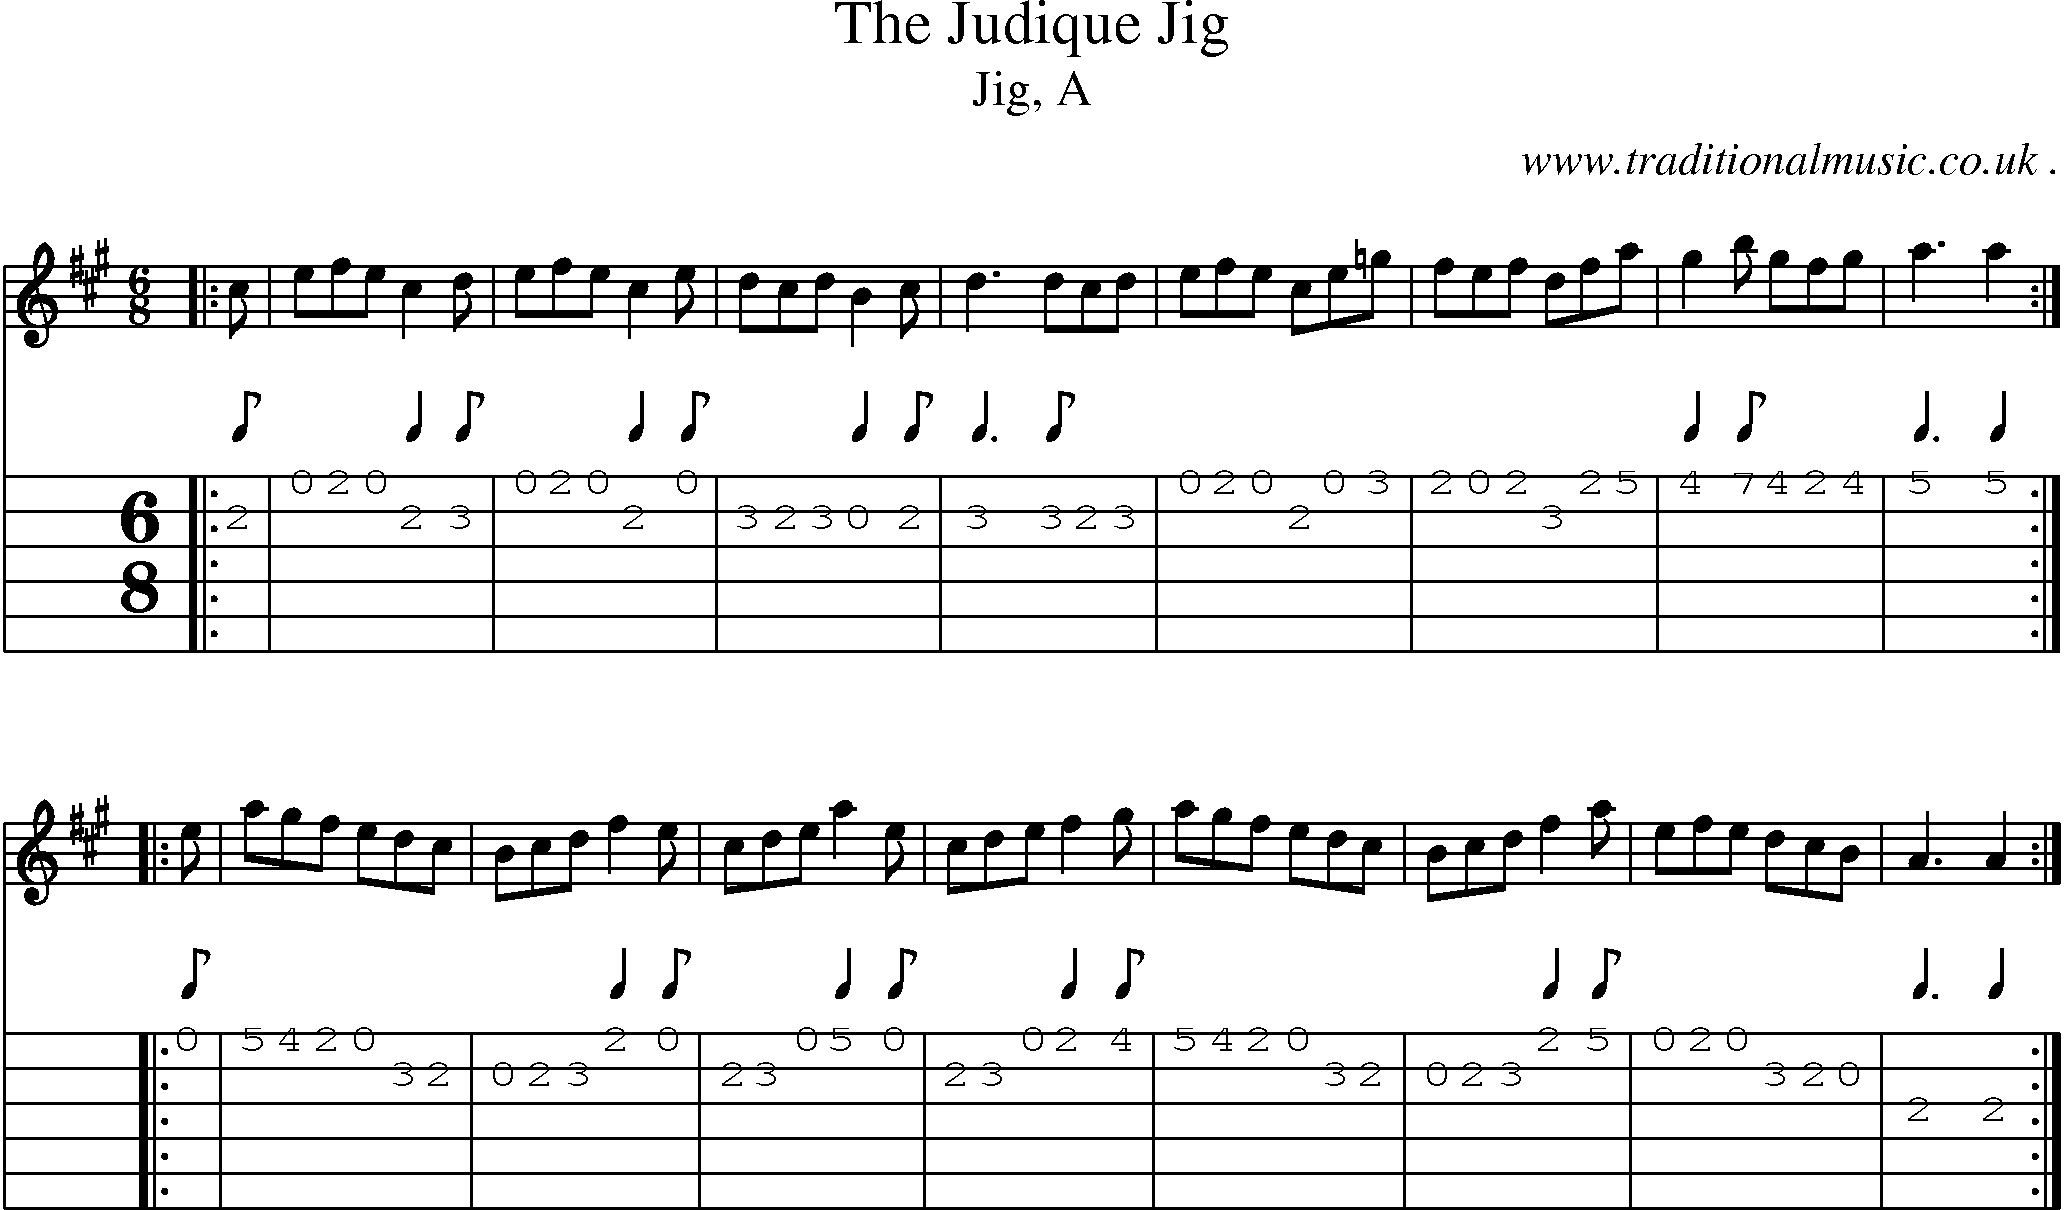 Sheet-music  score, Chords and Guitar Tabs for The Judique Jig